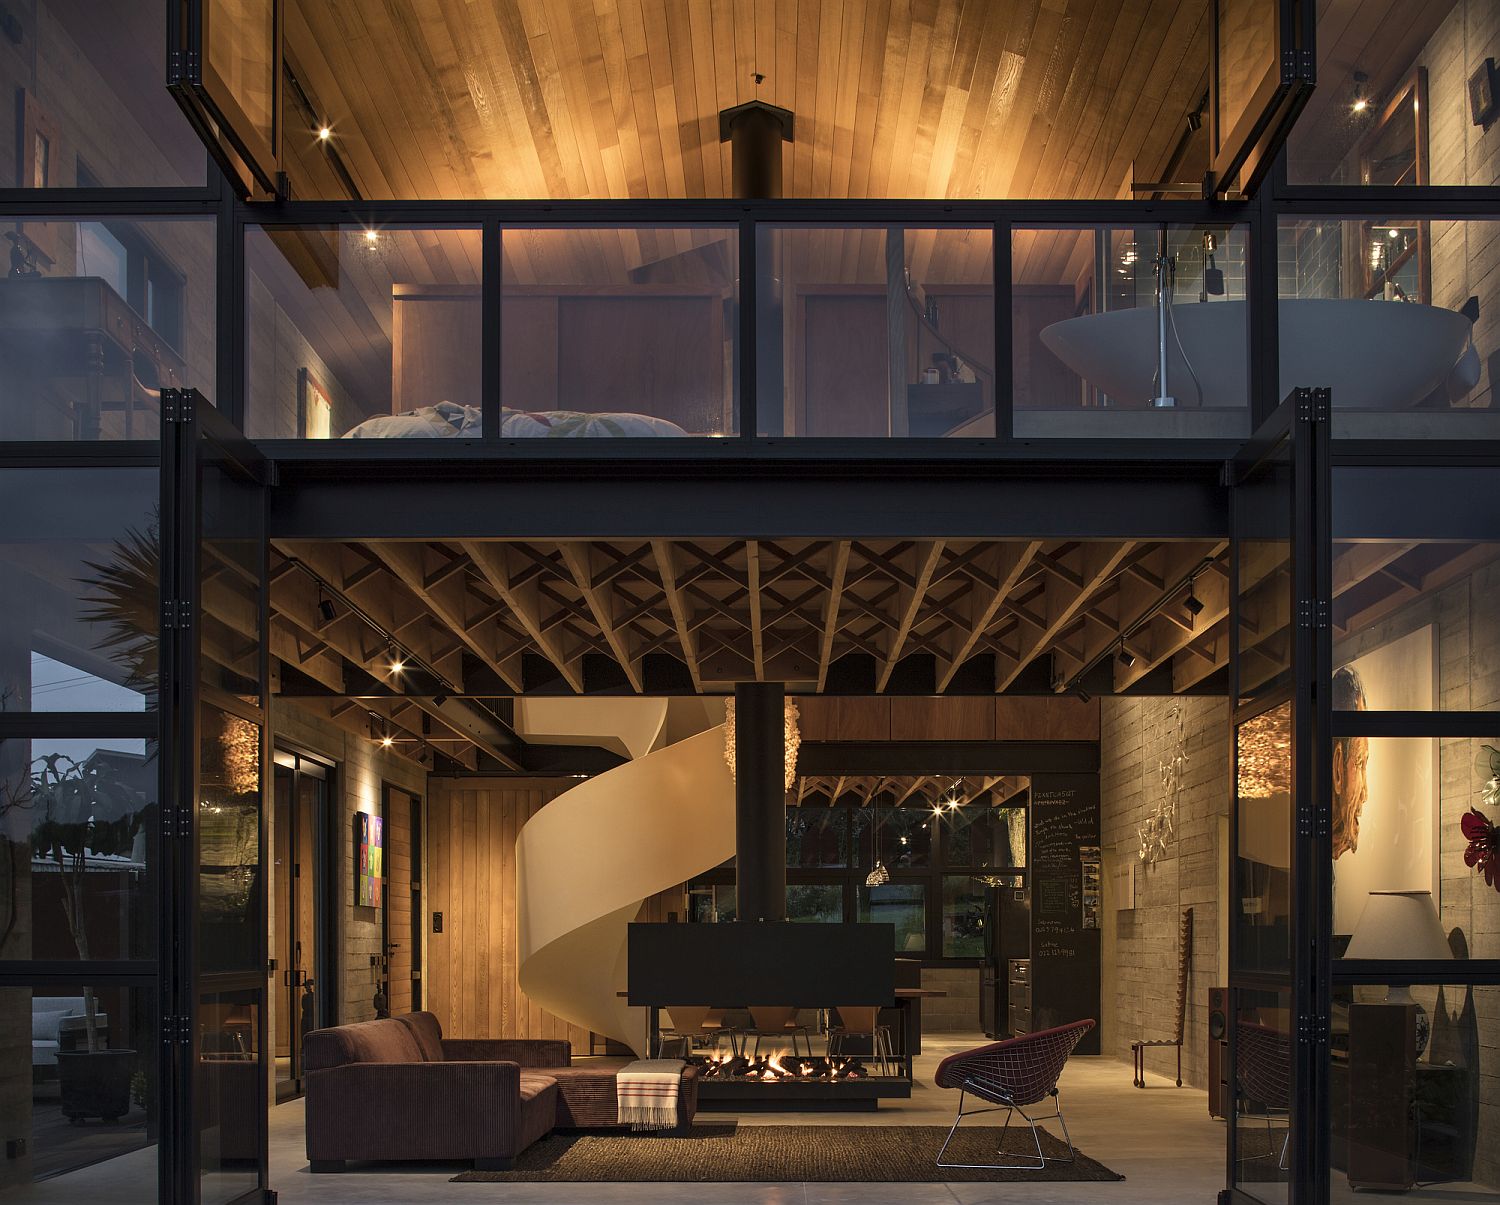 Wall-of-glass-windows-and-doors-opens-up-the-interior-to-the-view-outside